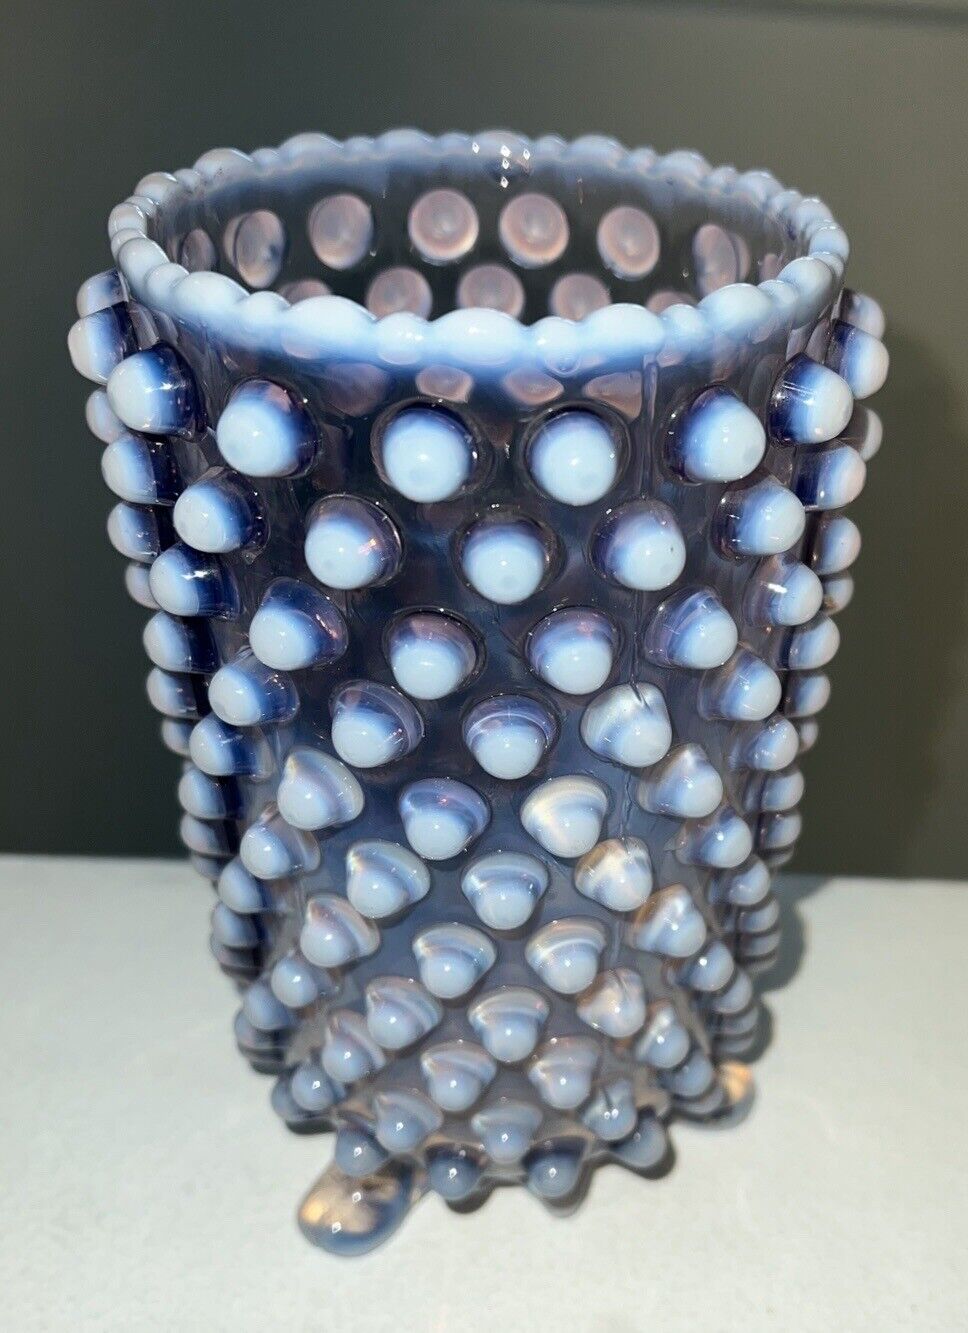 Vintage Lavender Opalescent Hobnail Glass 3-Footed Celery Vase 6 3/4 Inches Tall